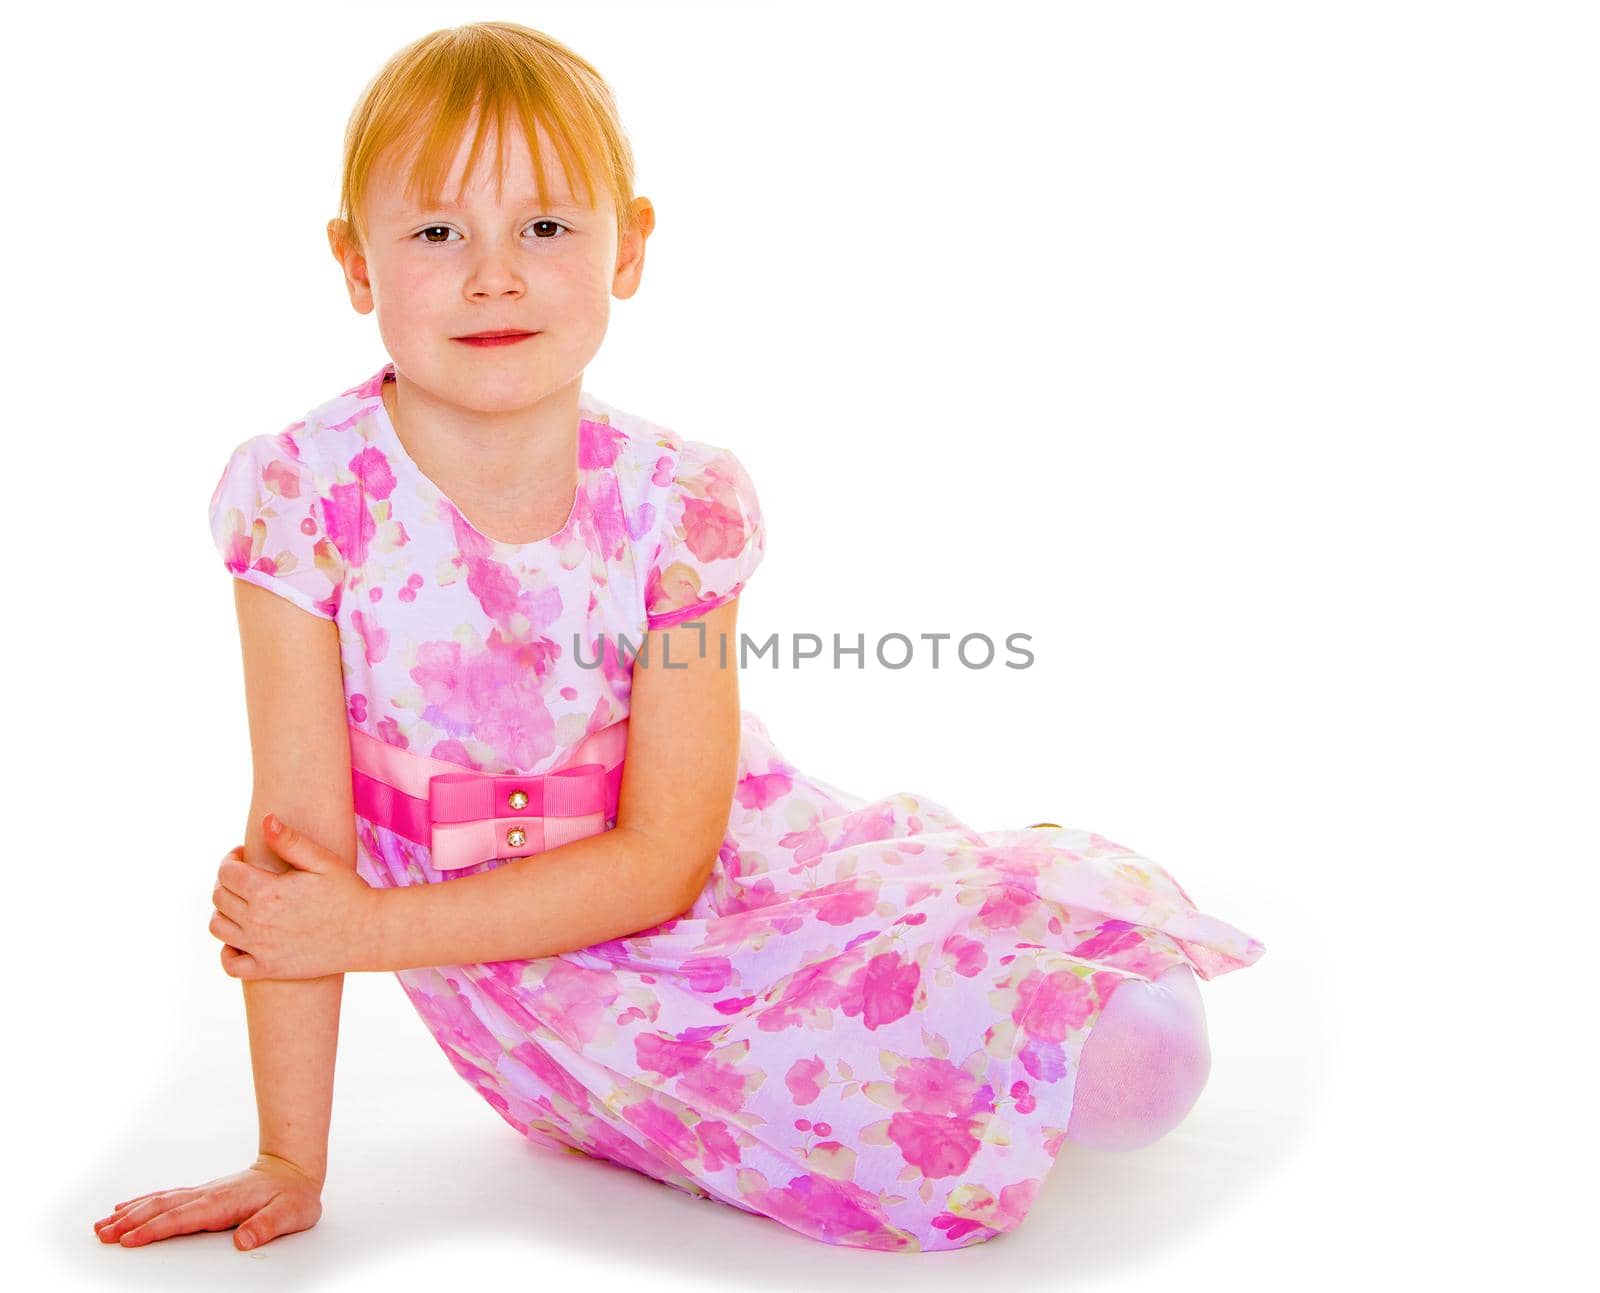 Sits leaning on hand a small charming girl. Isolated on white background